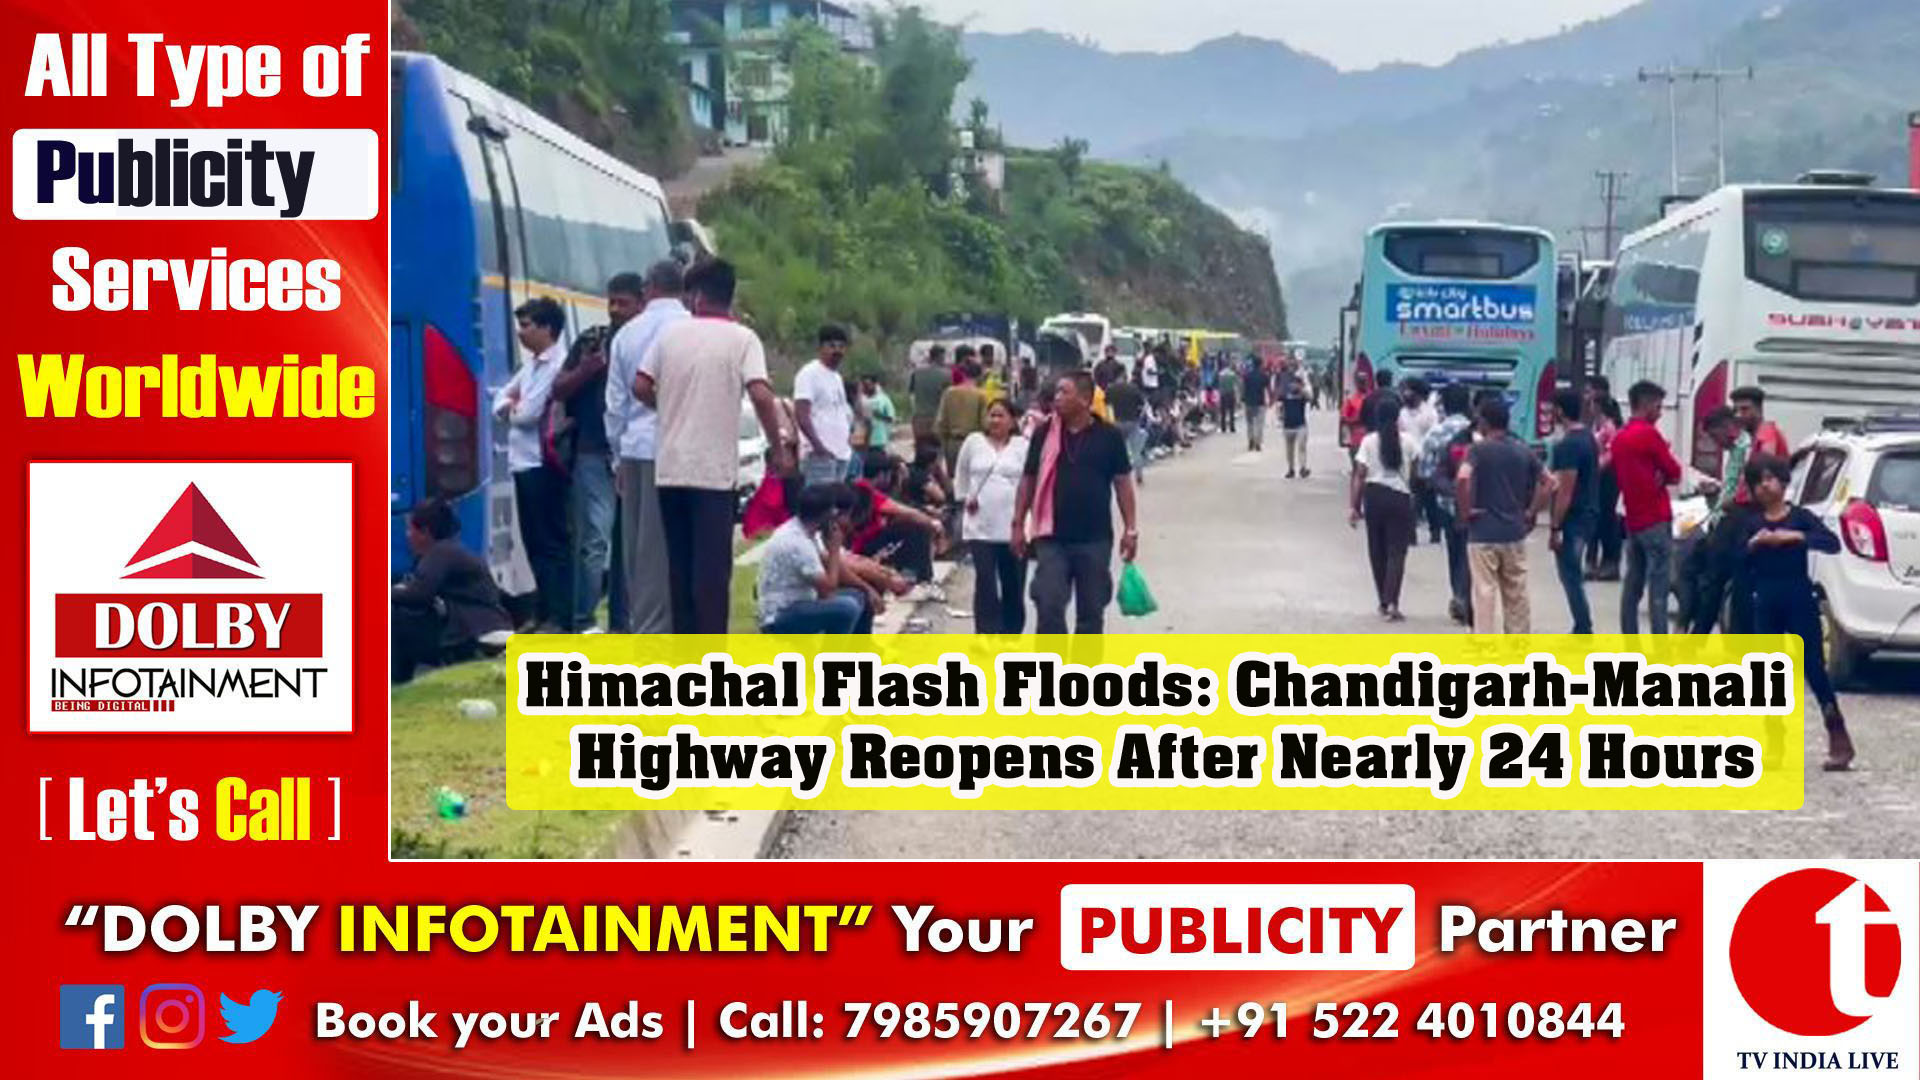 Himachal Flash Floods: Chandigarh-Manali Highway Reopens After Nearly 24 HoursHimachal Flash Floods: Chandigarh-Manali Highway Reopens After Nearly 24 Hours